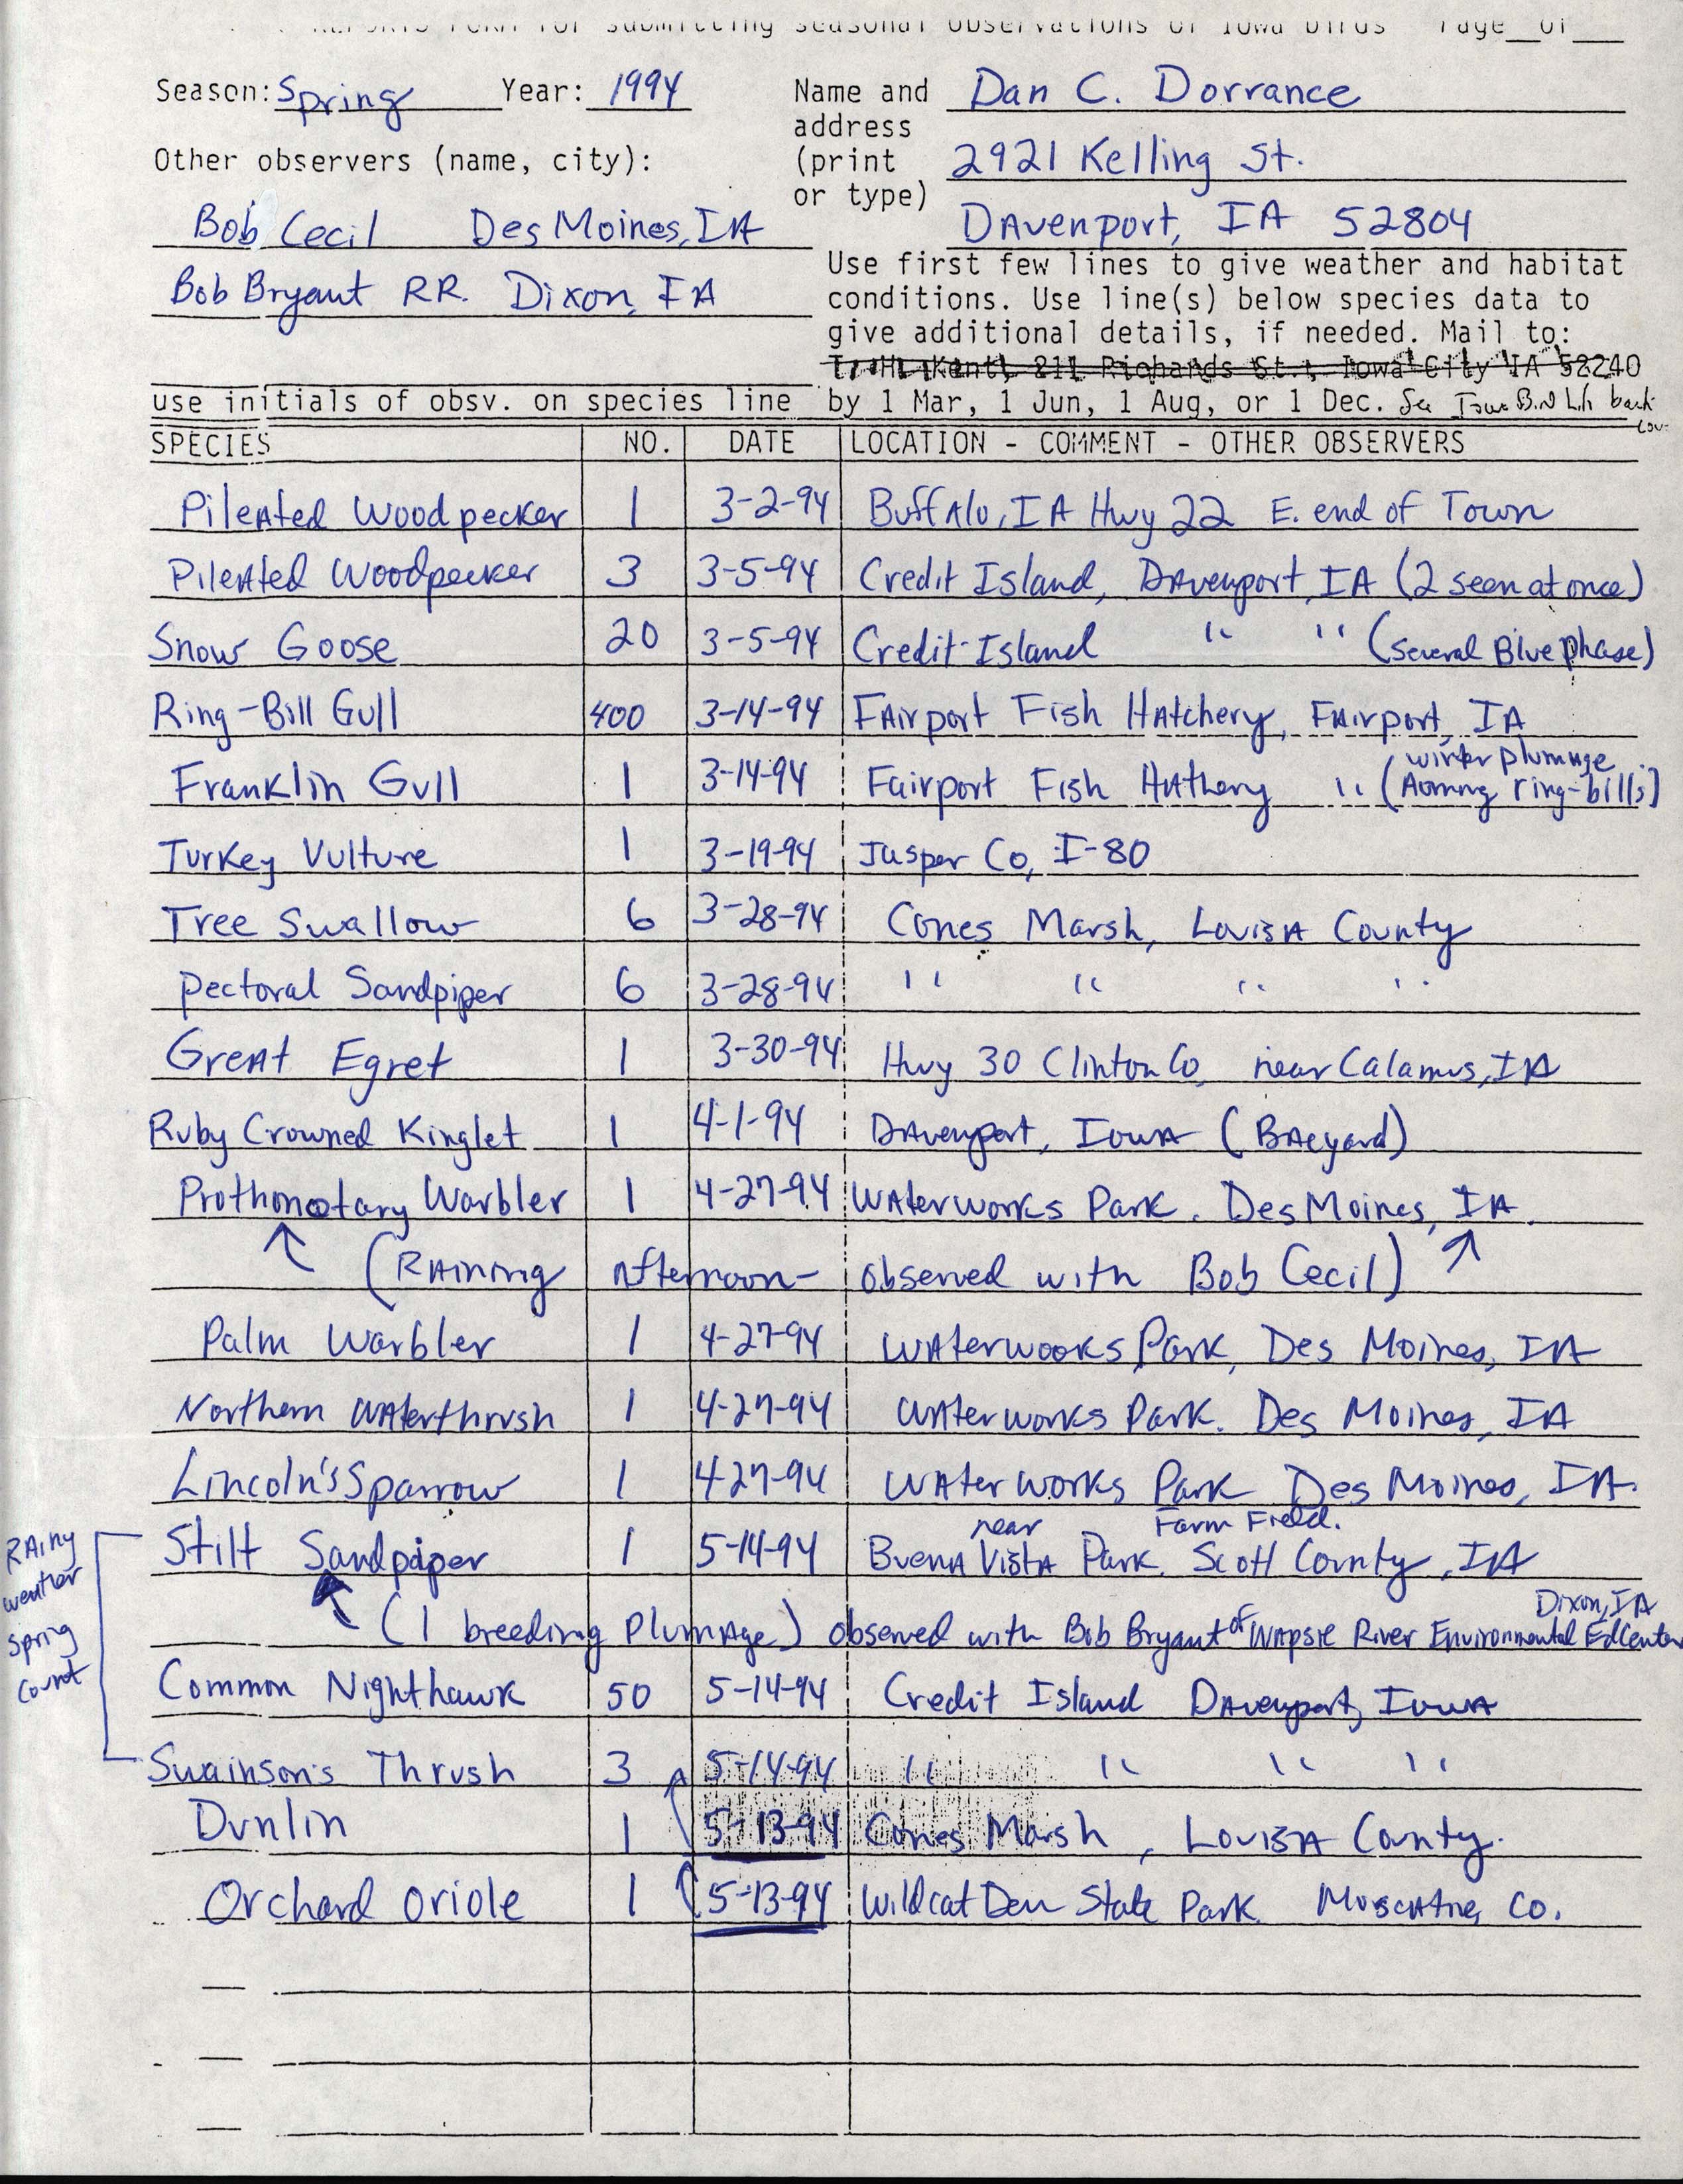 Field reports form for submitting seasonal observations of Iowa birds, Dan Dorrance, Spring 1994